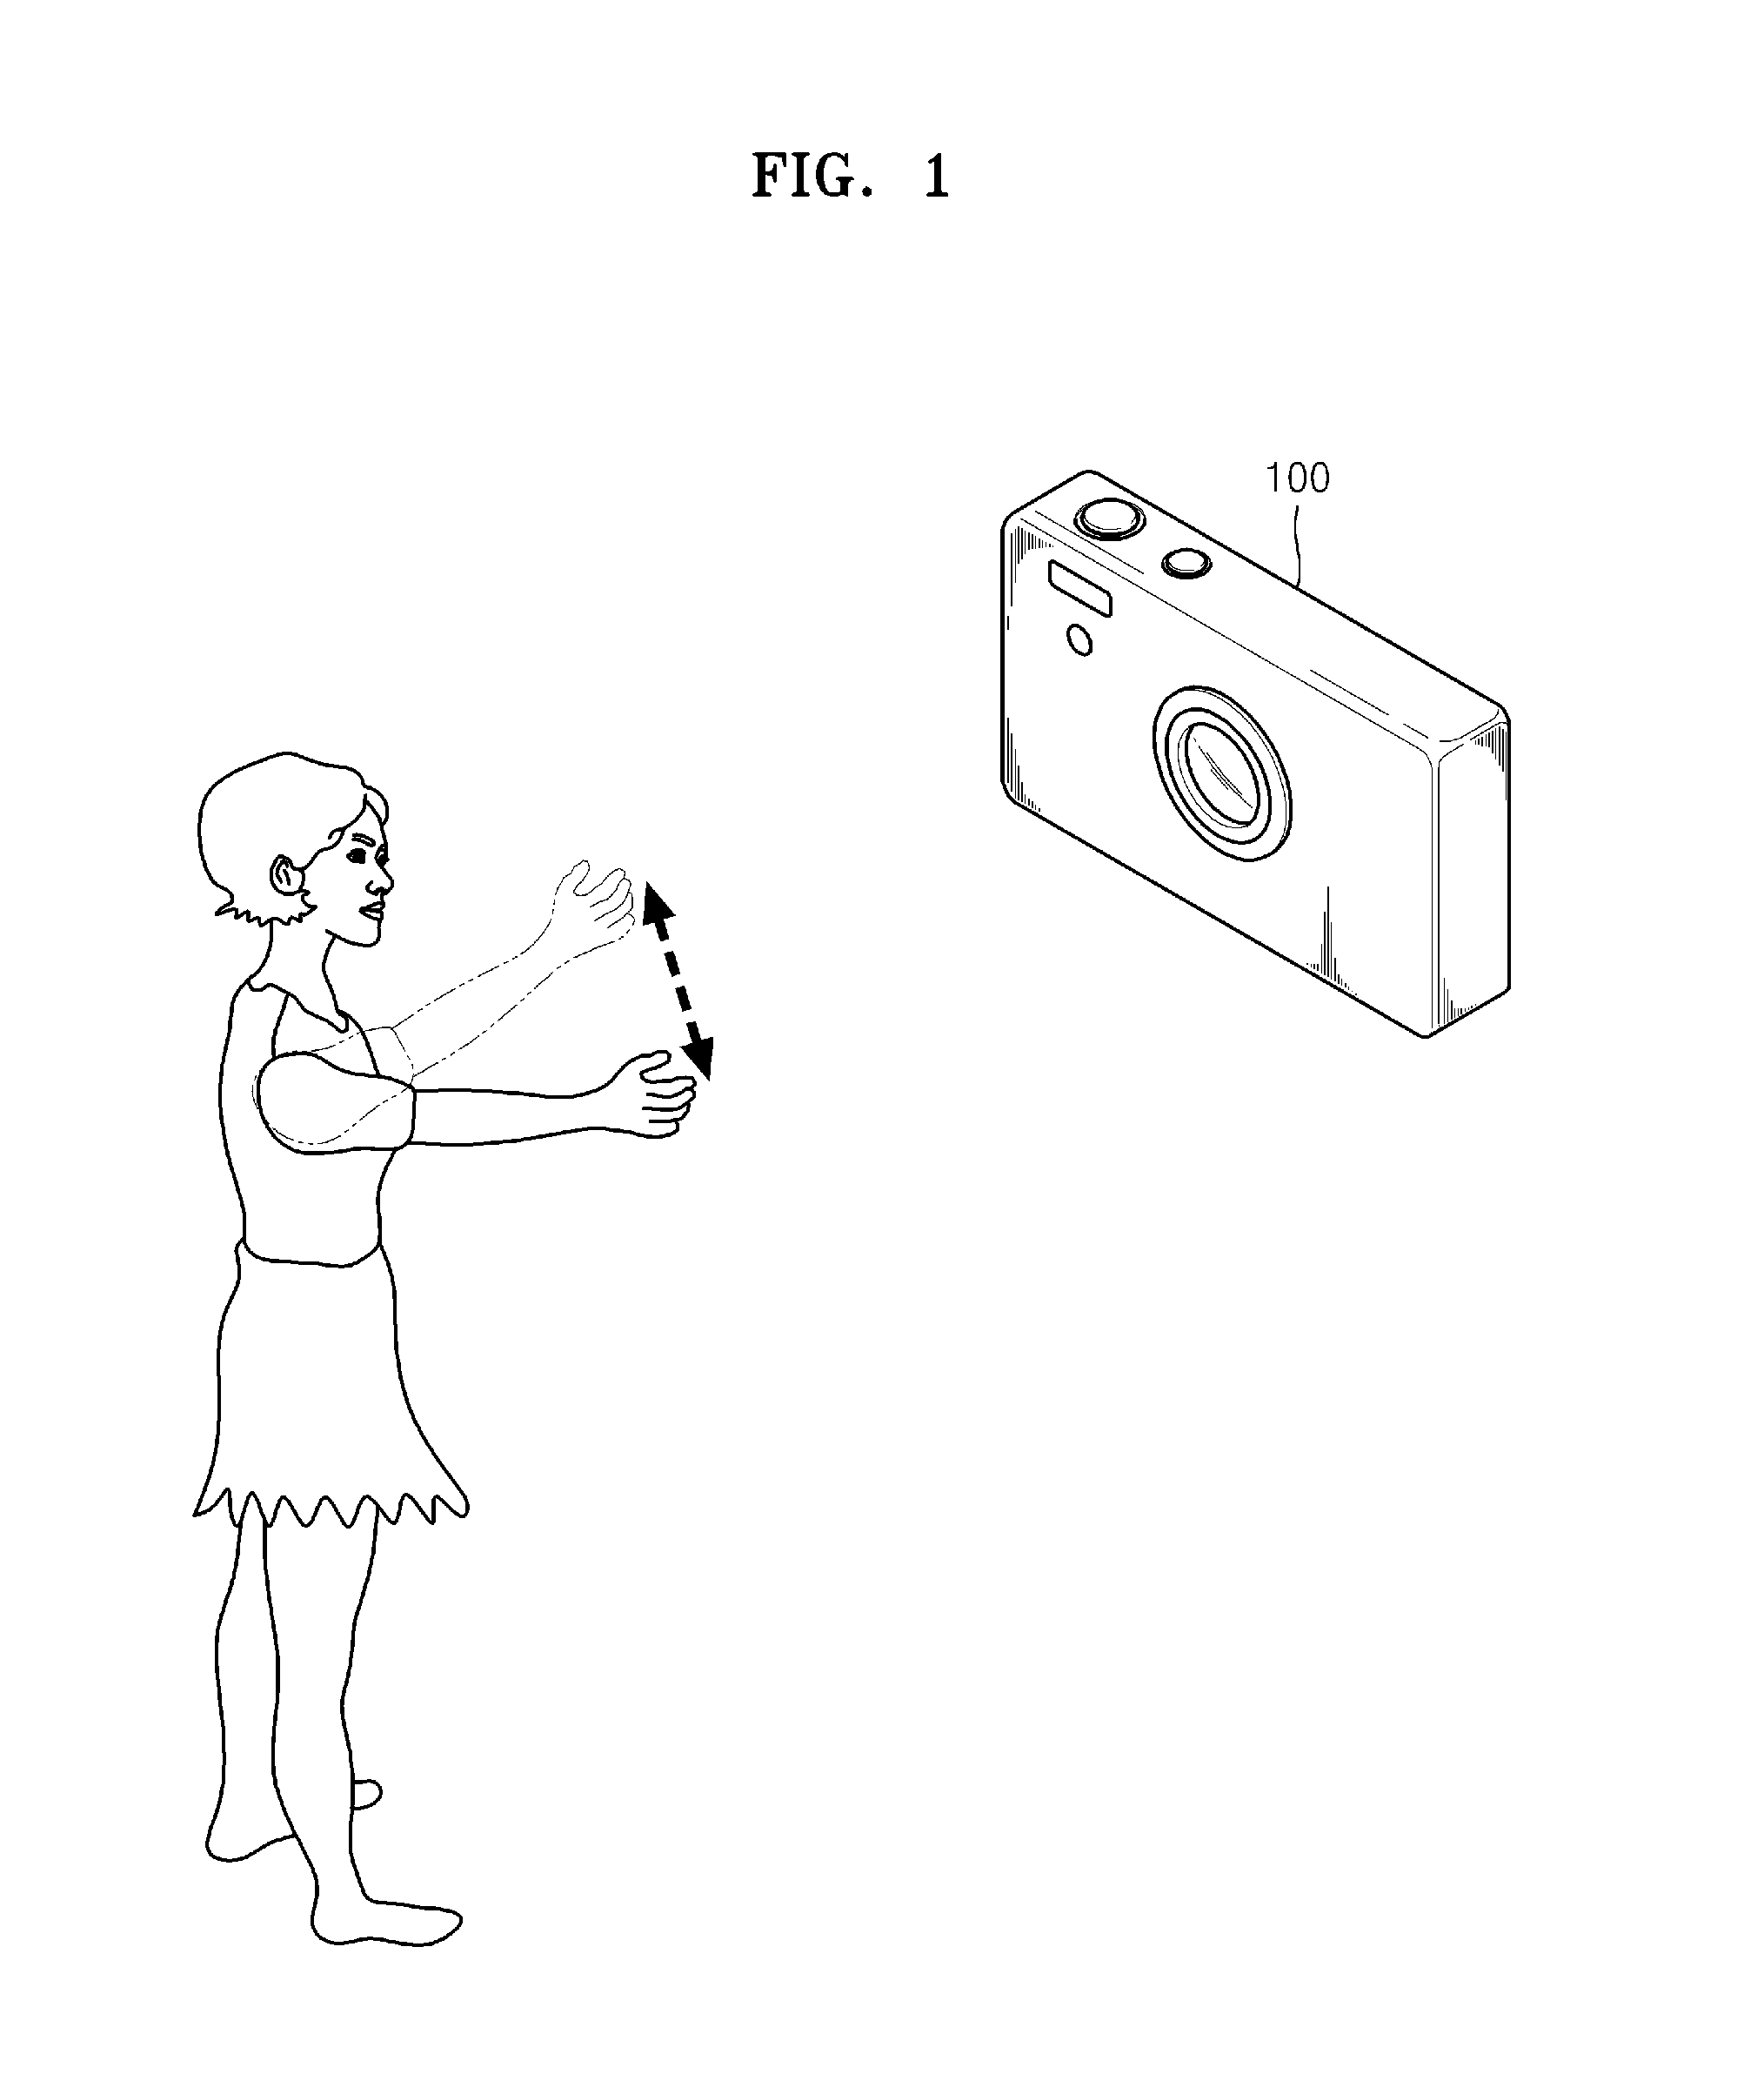 Photographing apparatus, method of controlling the same, and computer-readable recording medium